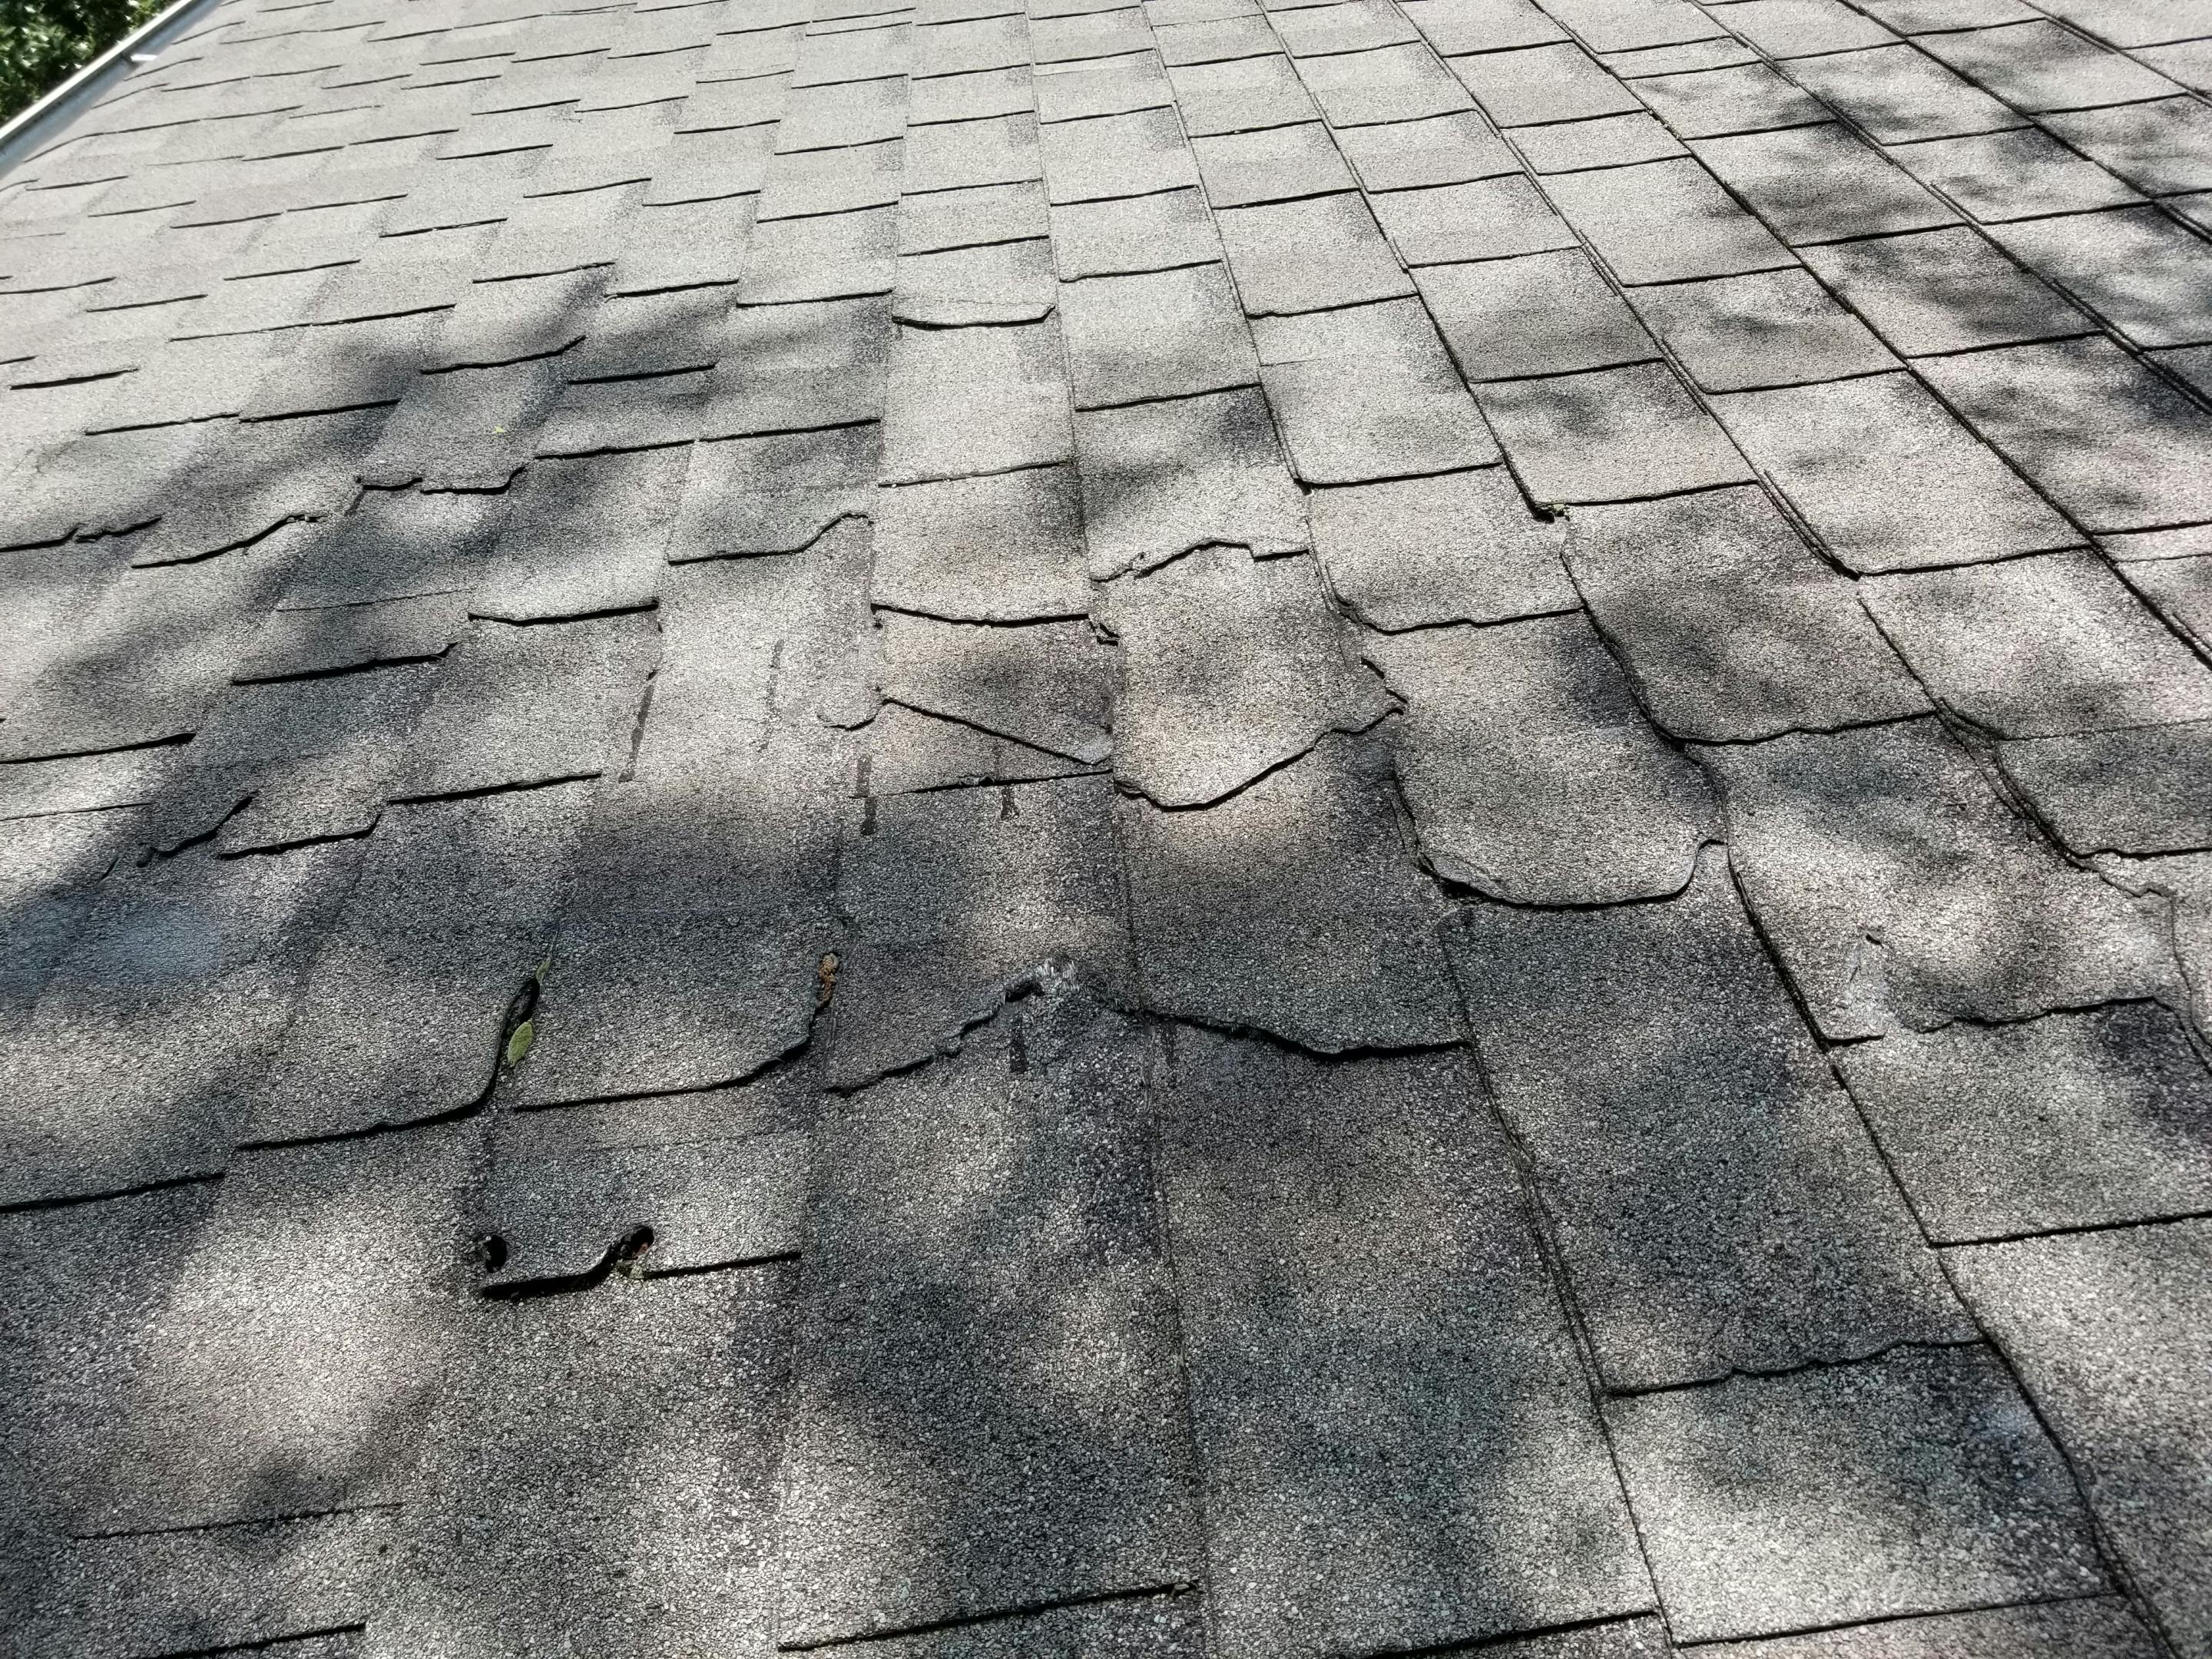 An asphalt shingle roof in need of replacing due to wear and tear